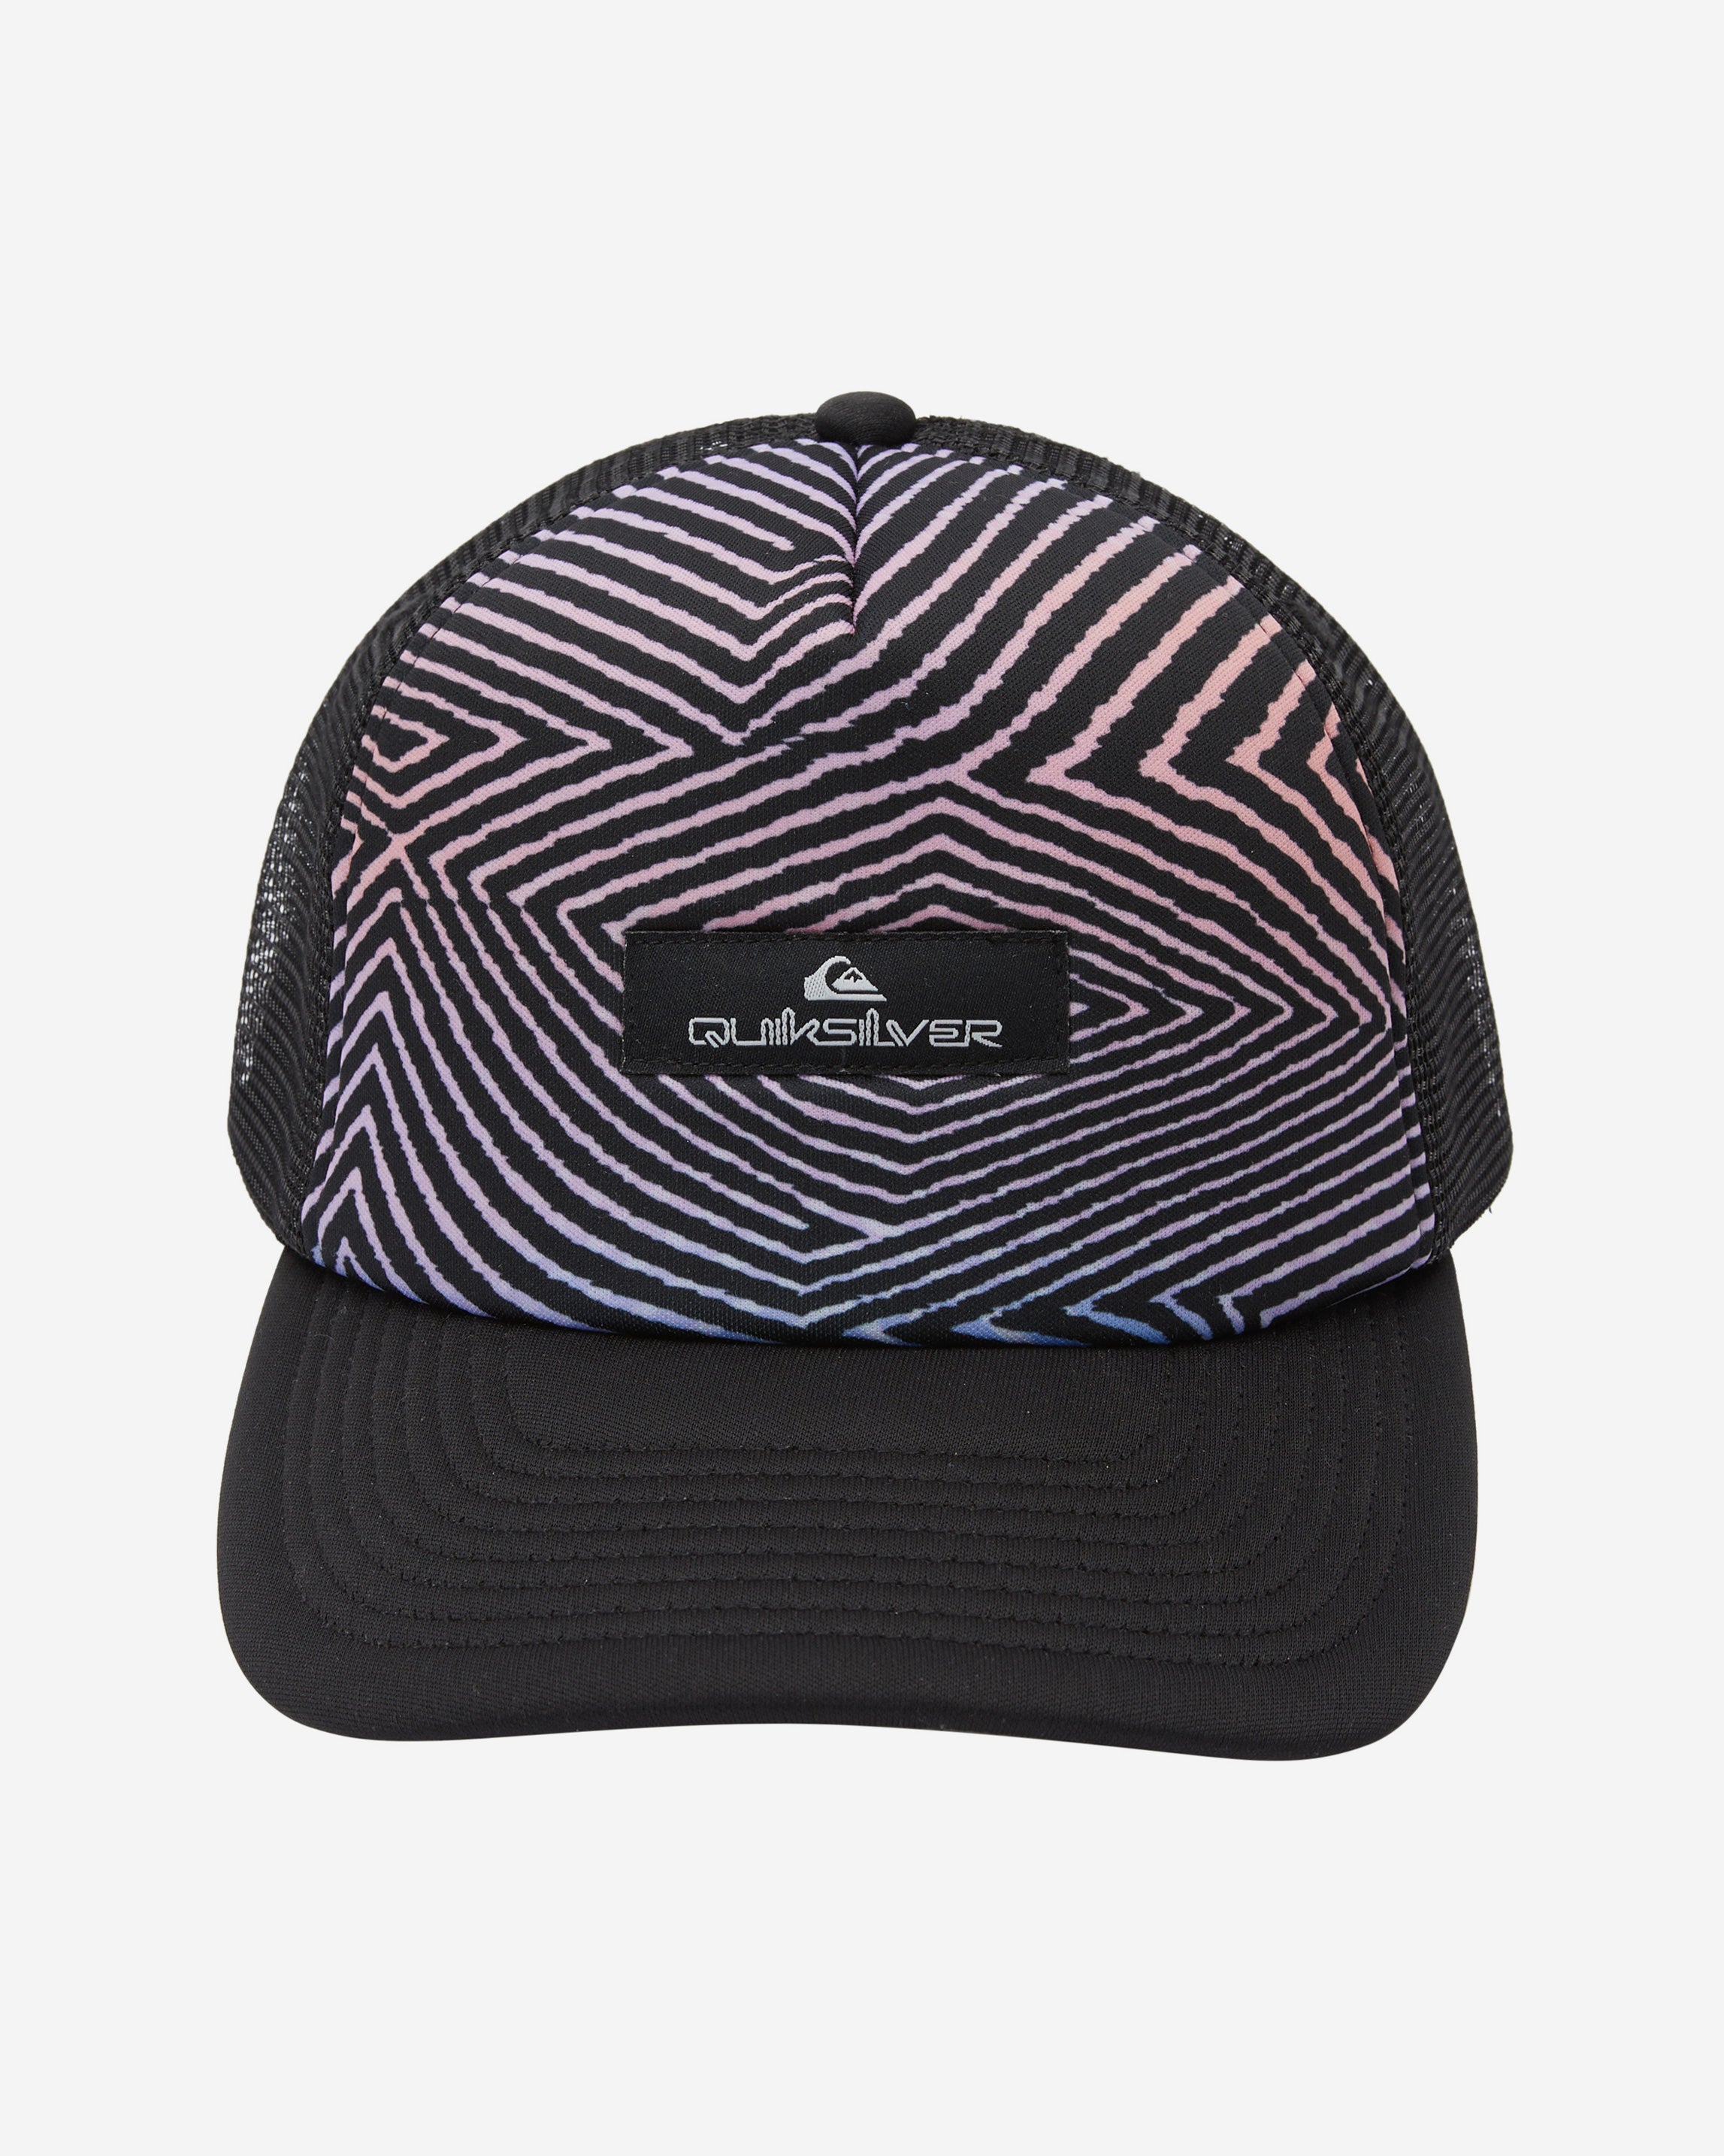 The Buzzard Coop trucker hat earns its stripes with 5-panel foam construction and sunset-hued bands of colors. Snapback closure lets you create a personalized fit.